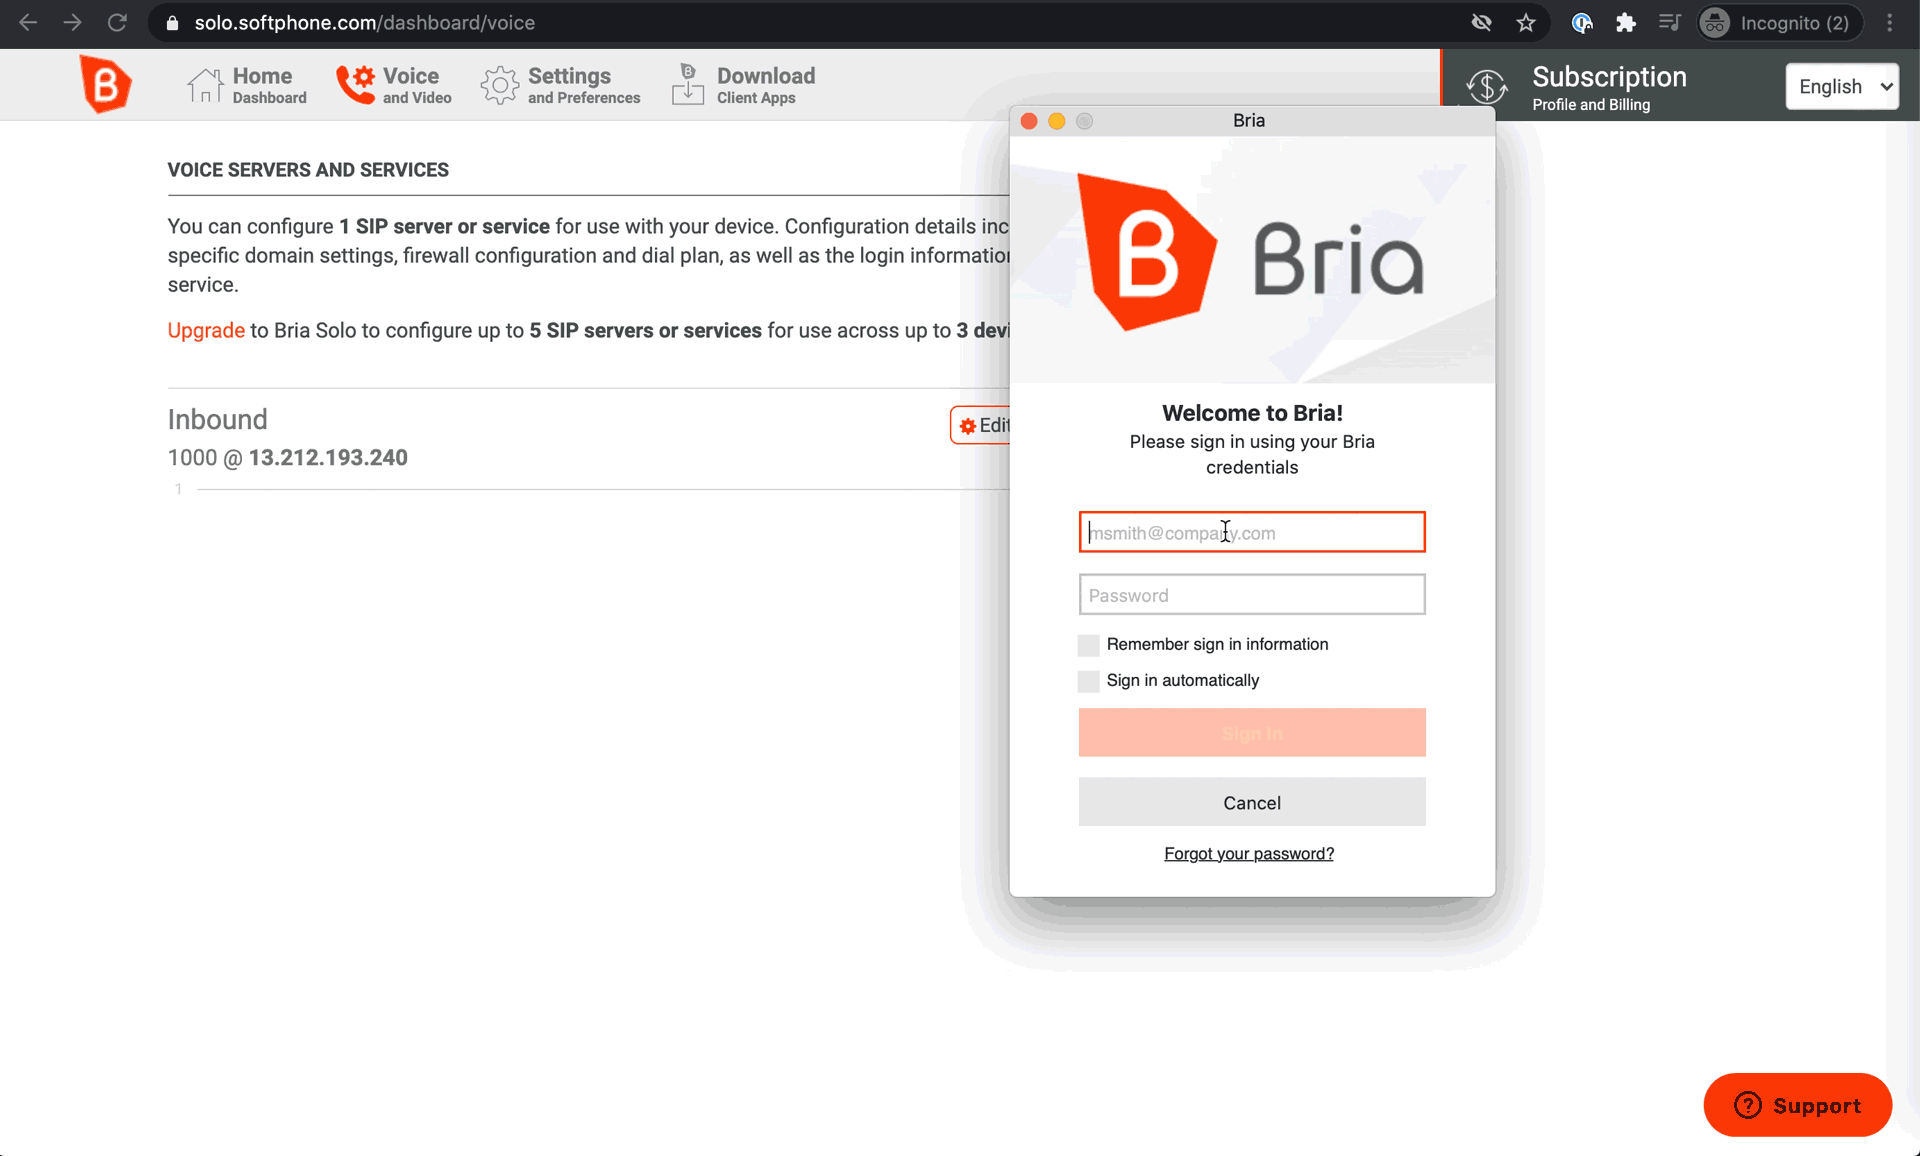 Receive Incoming calls on Bria